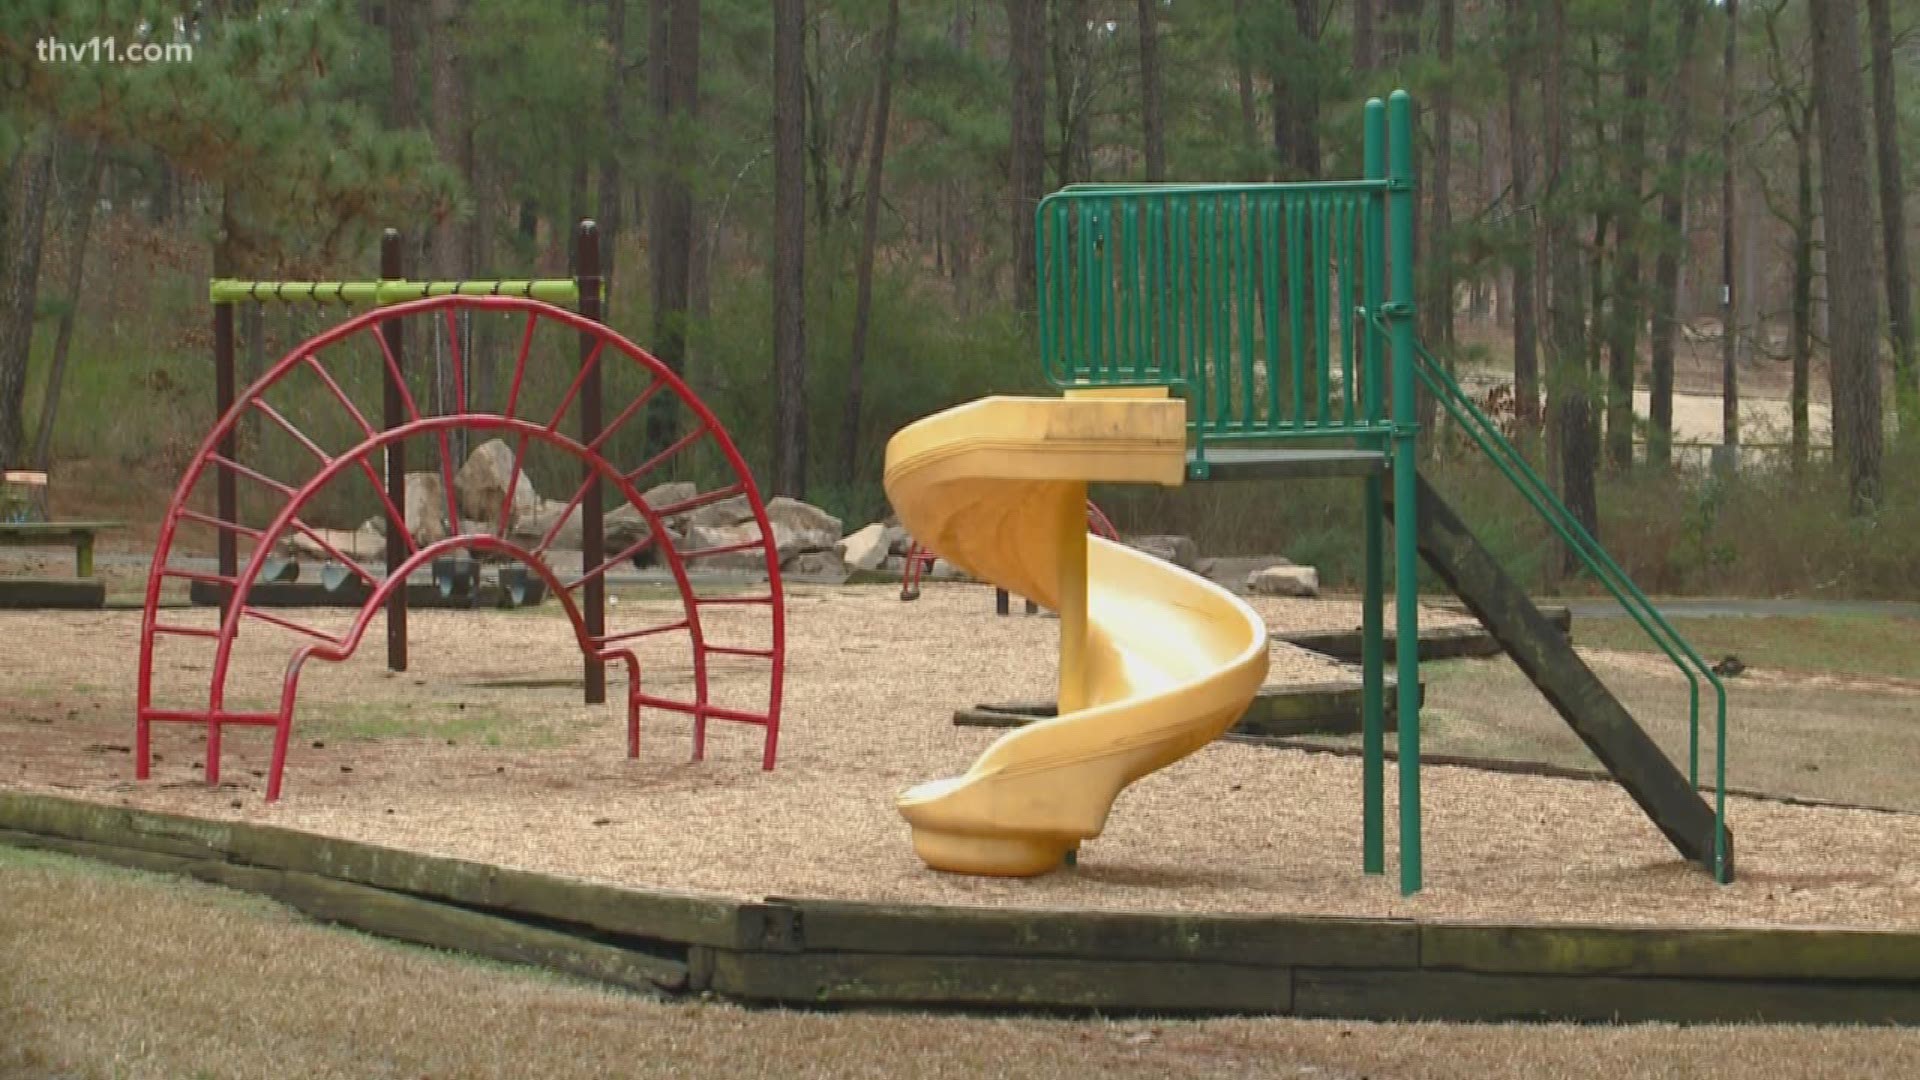 If your kids like to play at Reservoir Park, starting Monday, they'll have to find a new spot.